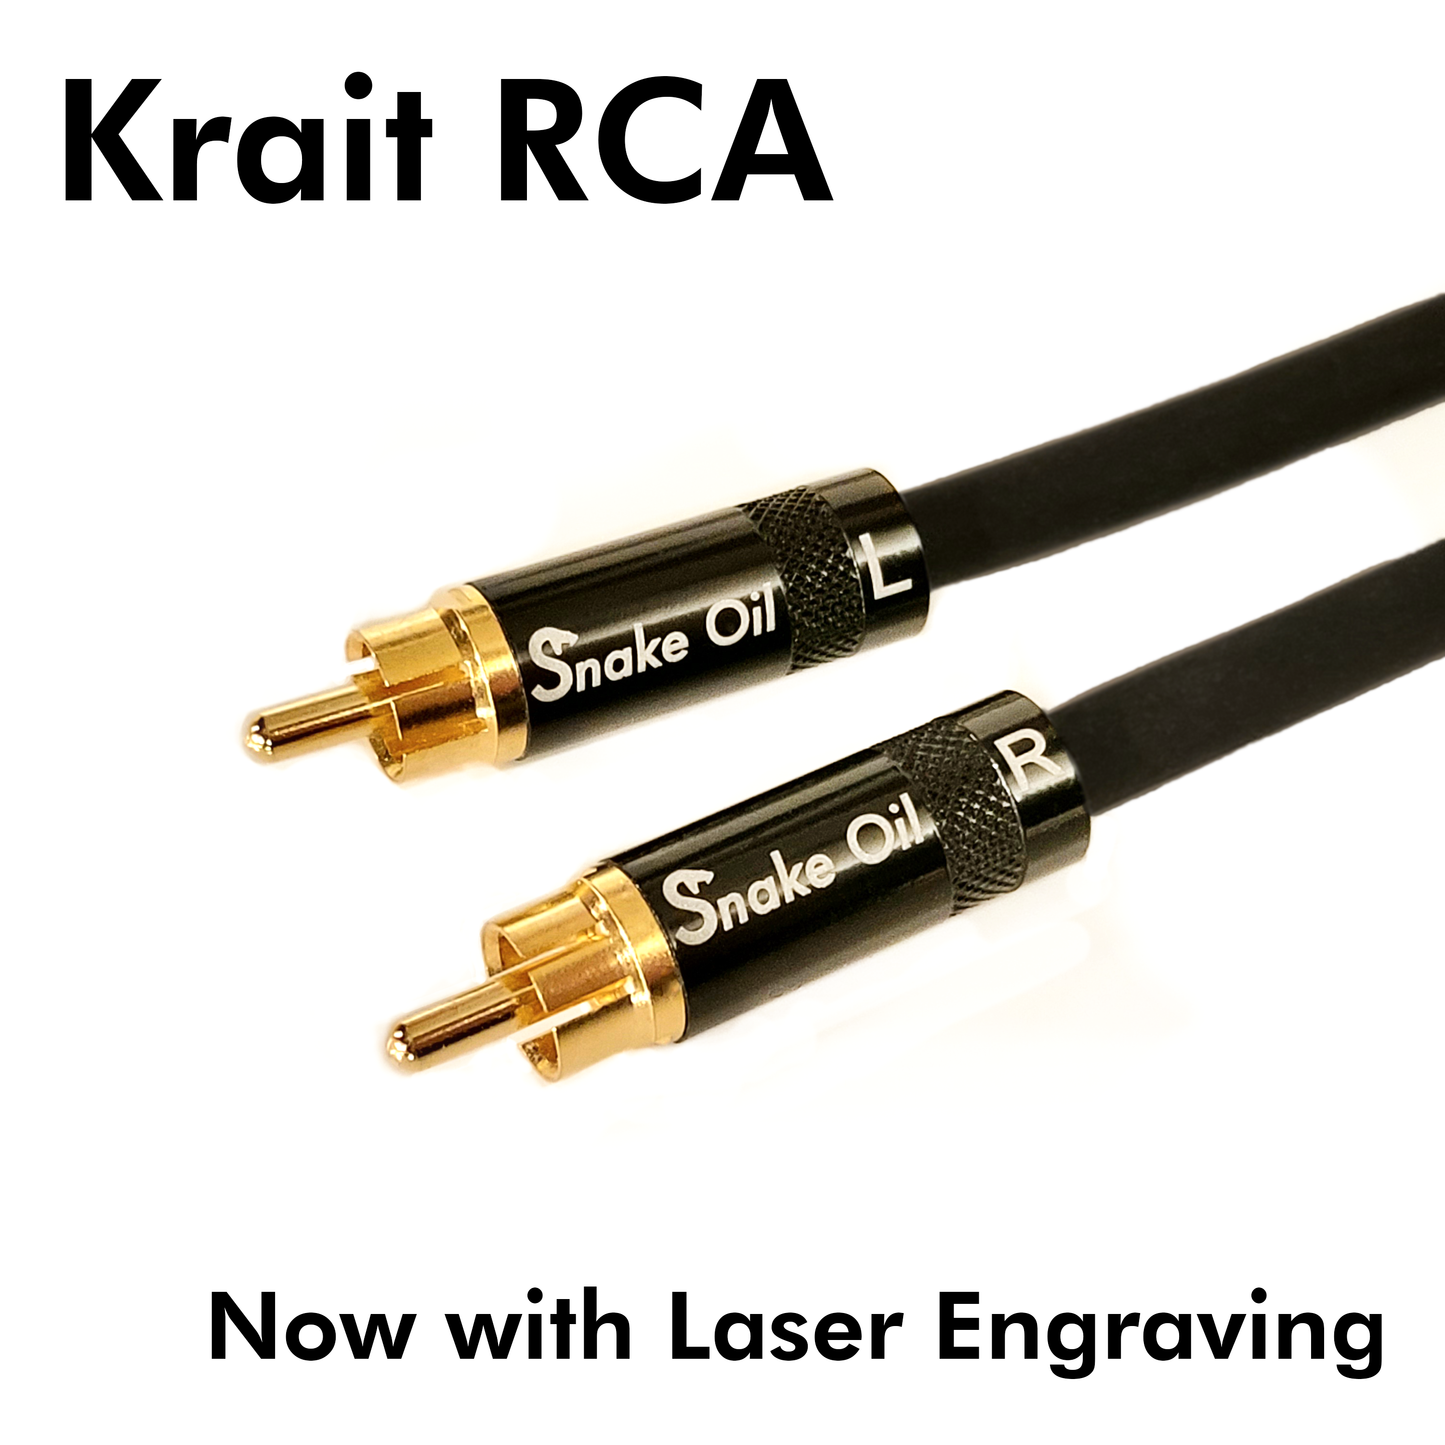 Pair of Krait RCA Cables (6 in - 10 ft)